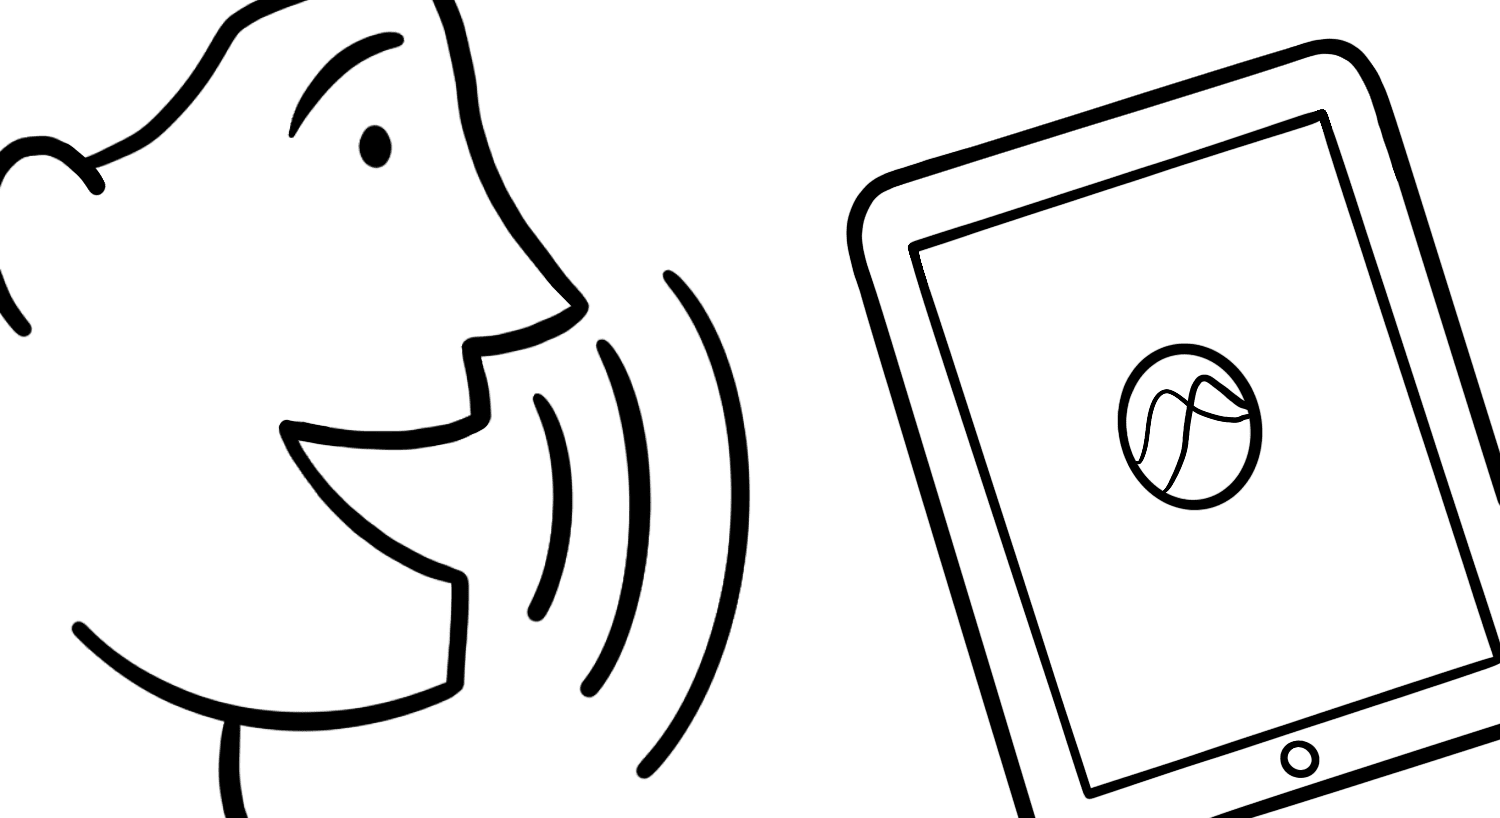 Illustration: A person speaking to a tablet. The tablet is displaying the recognition logo demonstrating its response to the person’s voice.